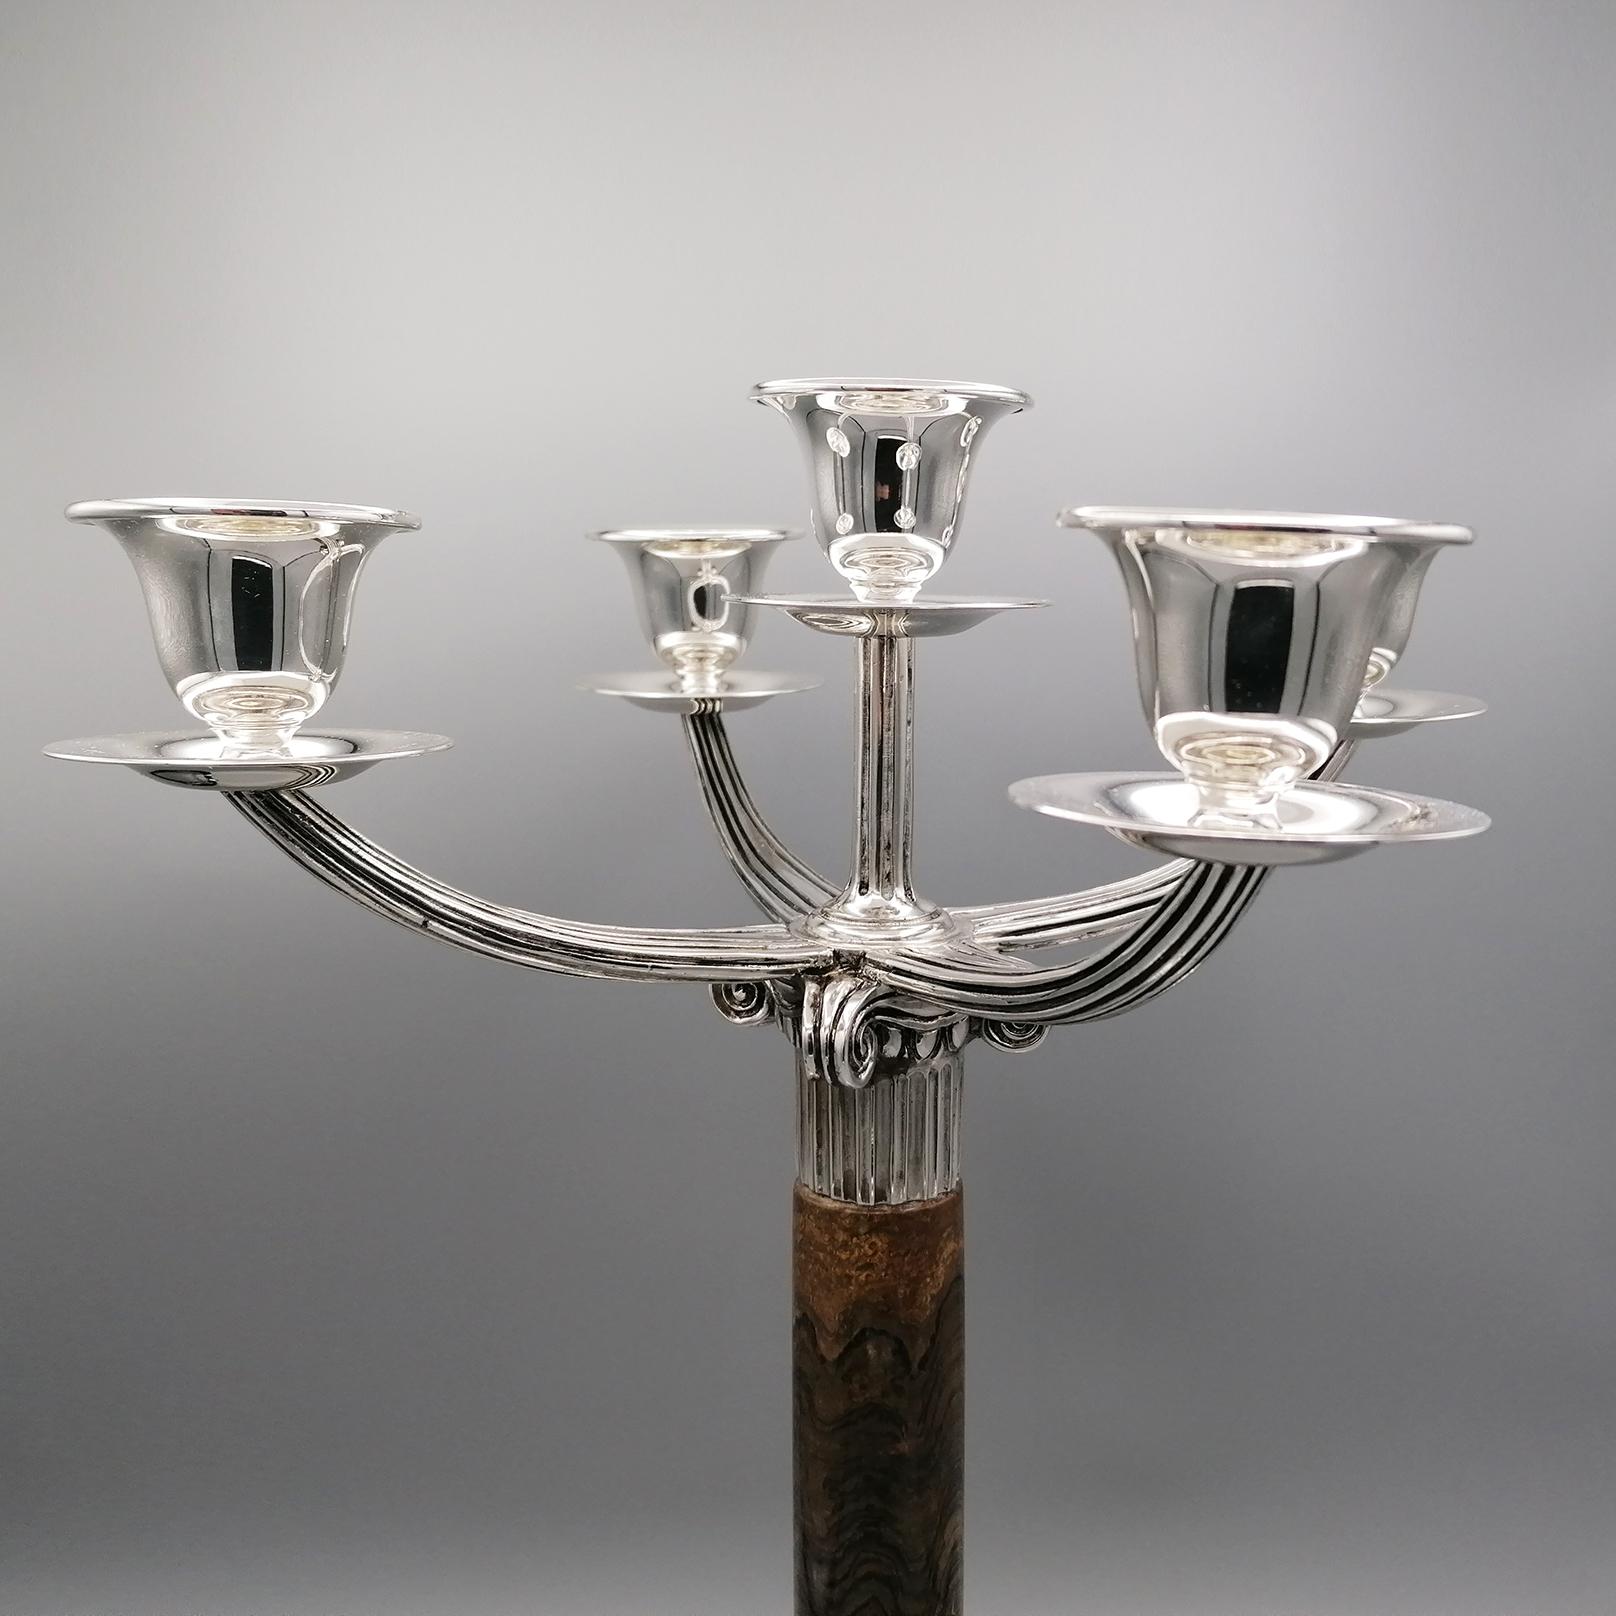 20th Century Italian Sterling Silver Pair Candelabras Neoclassical Style For Sale 3